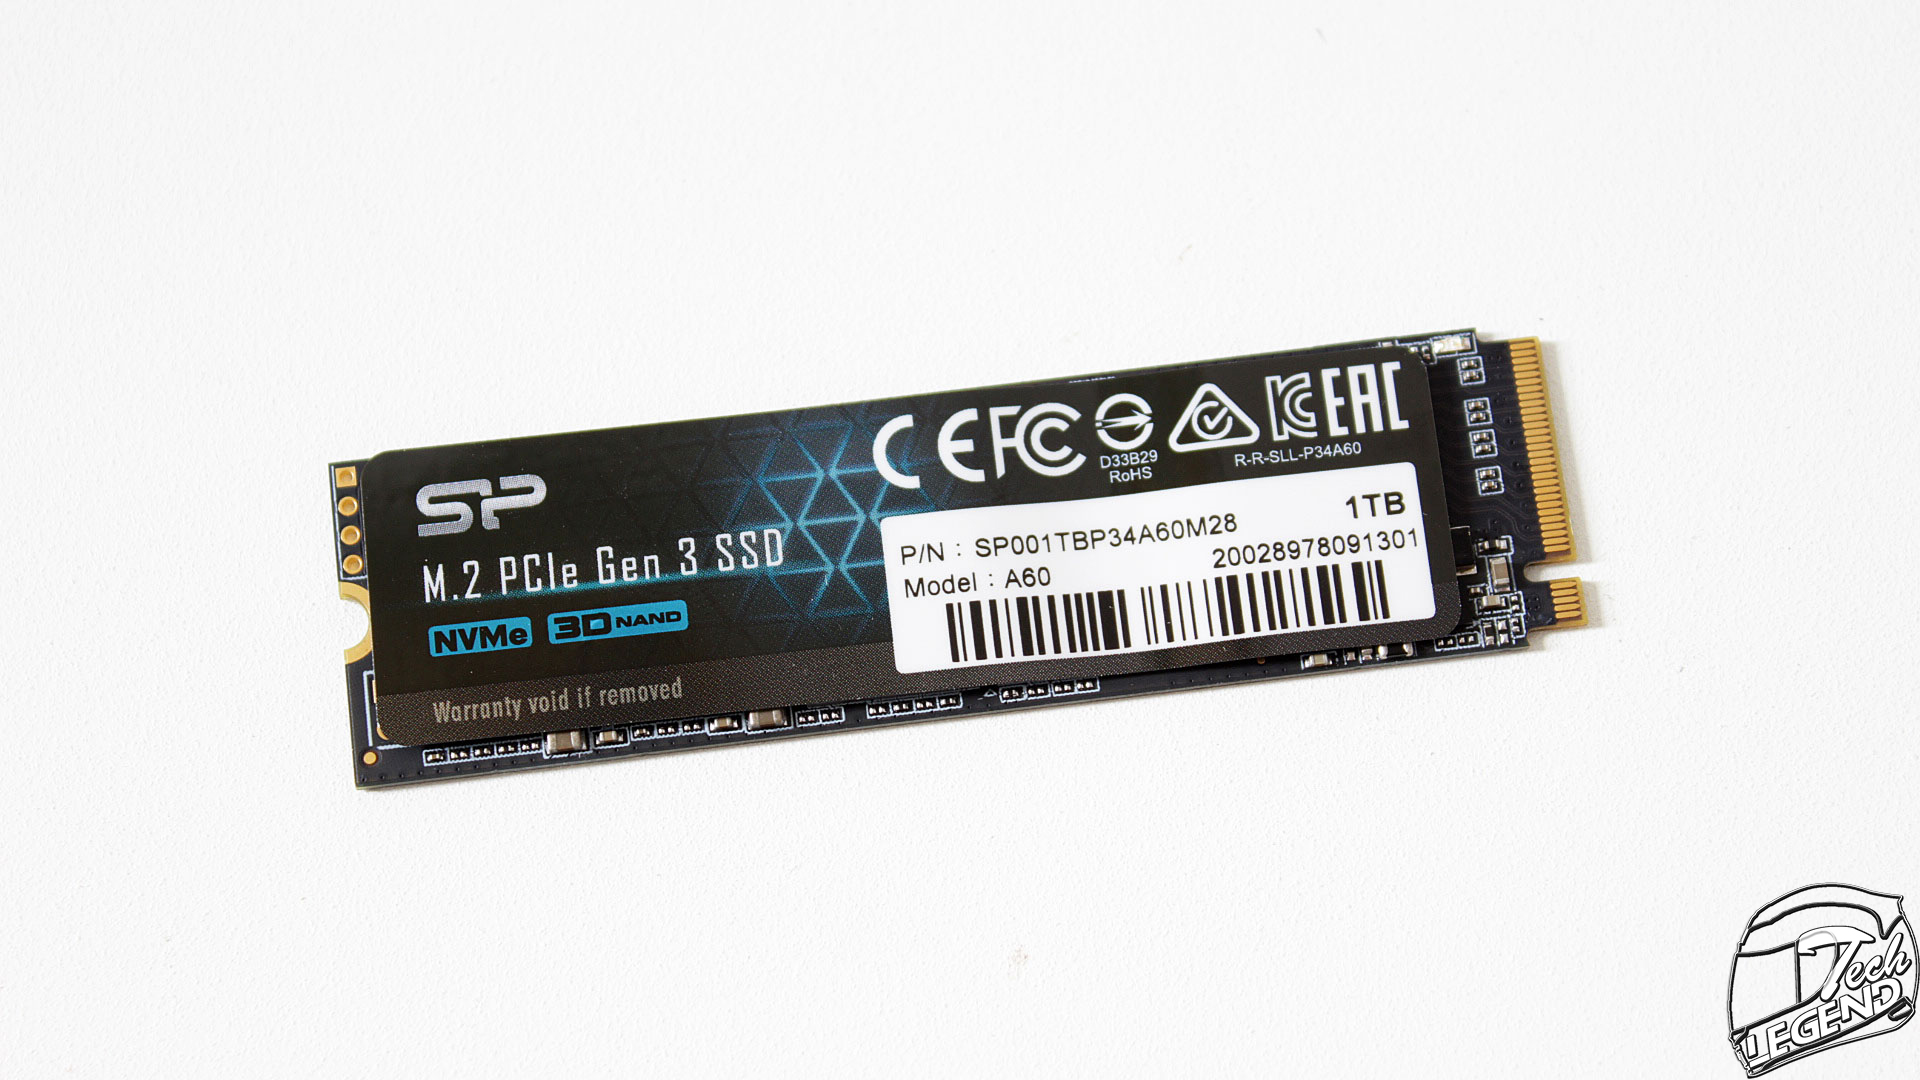 Silicon Power P34A60 1TB - M.2 SSD Review